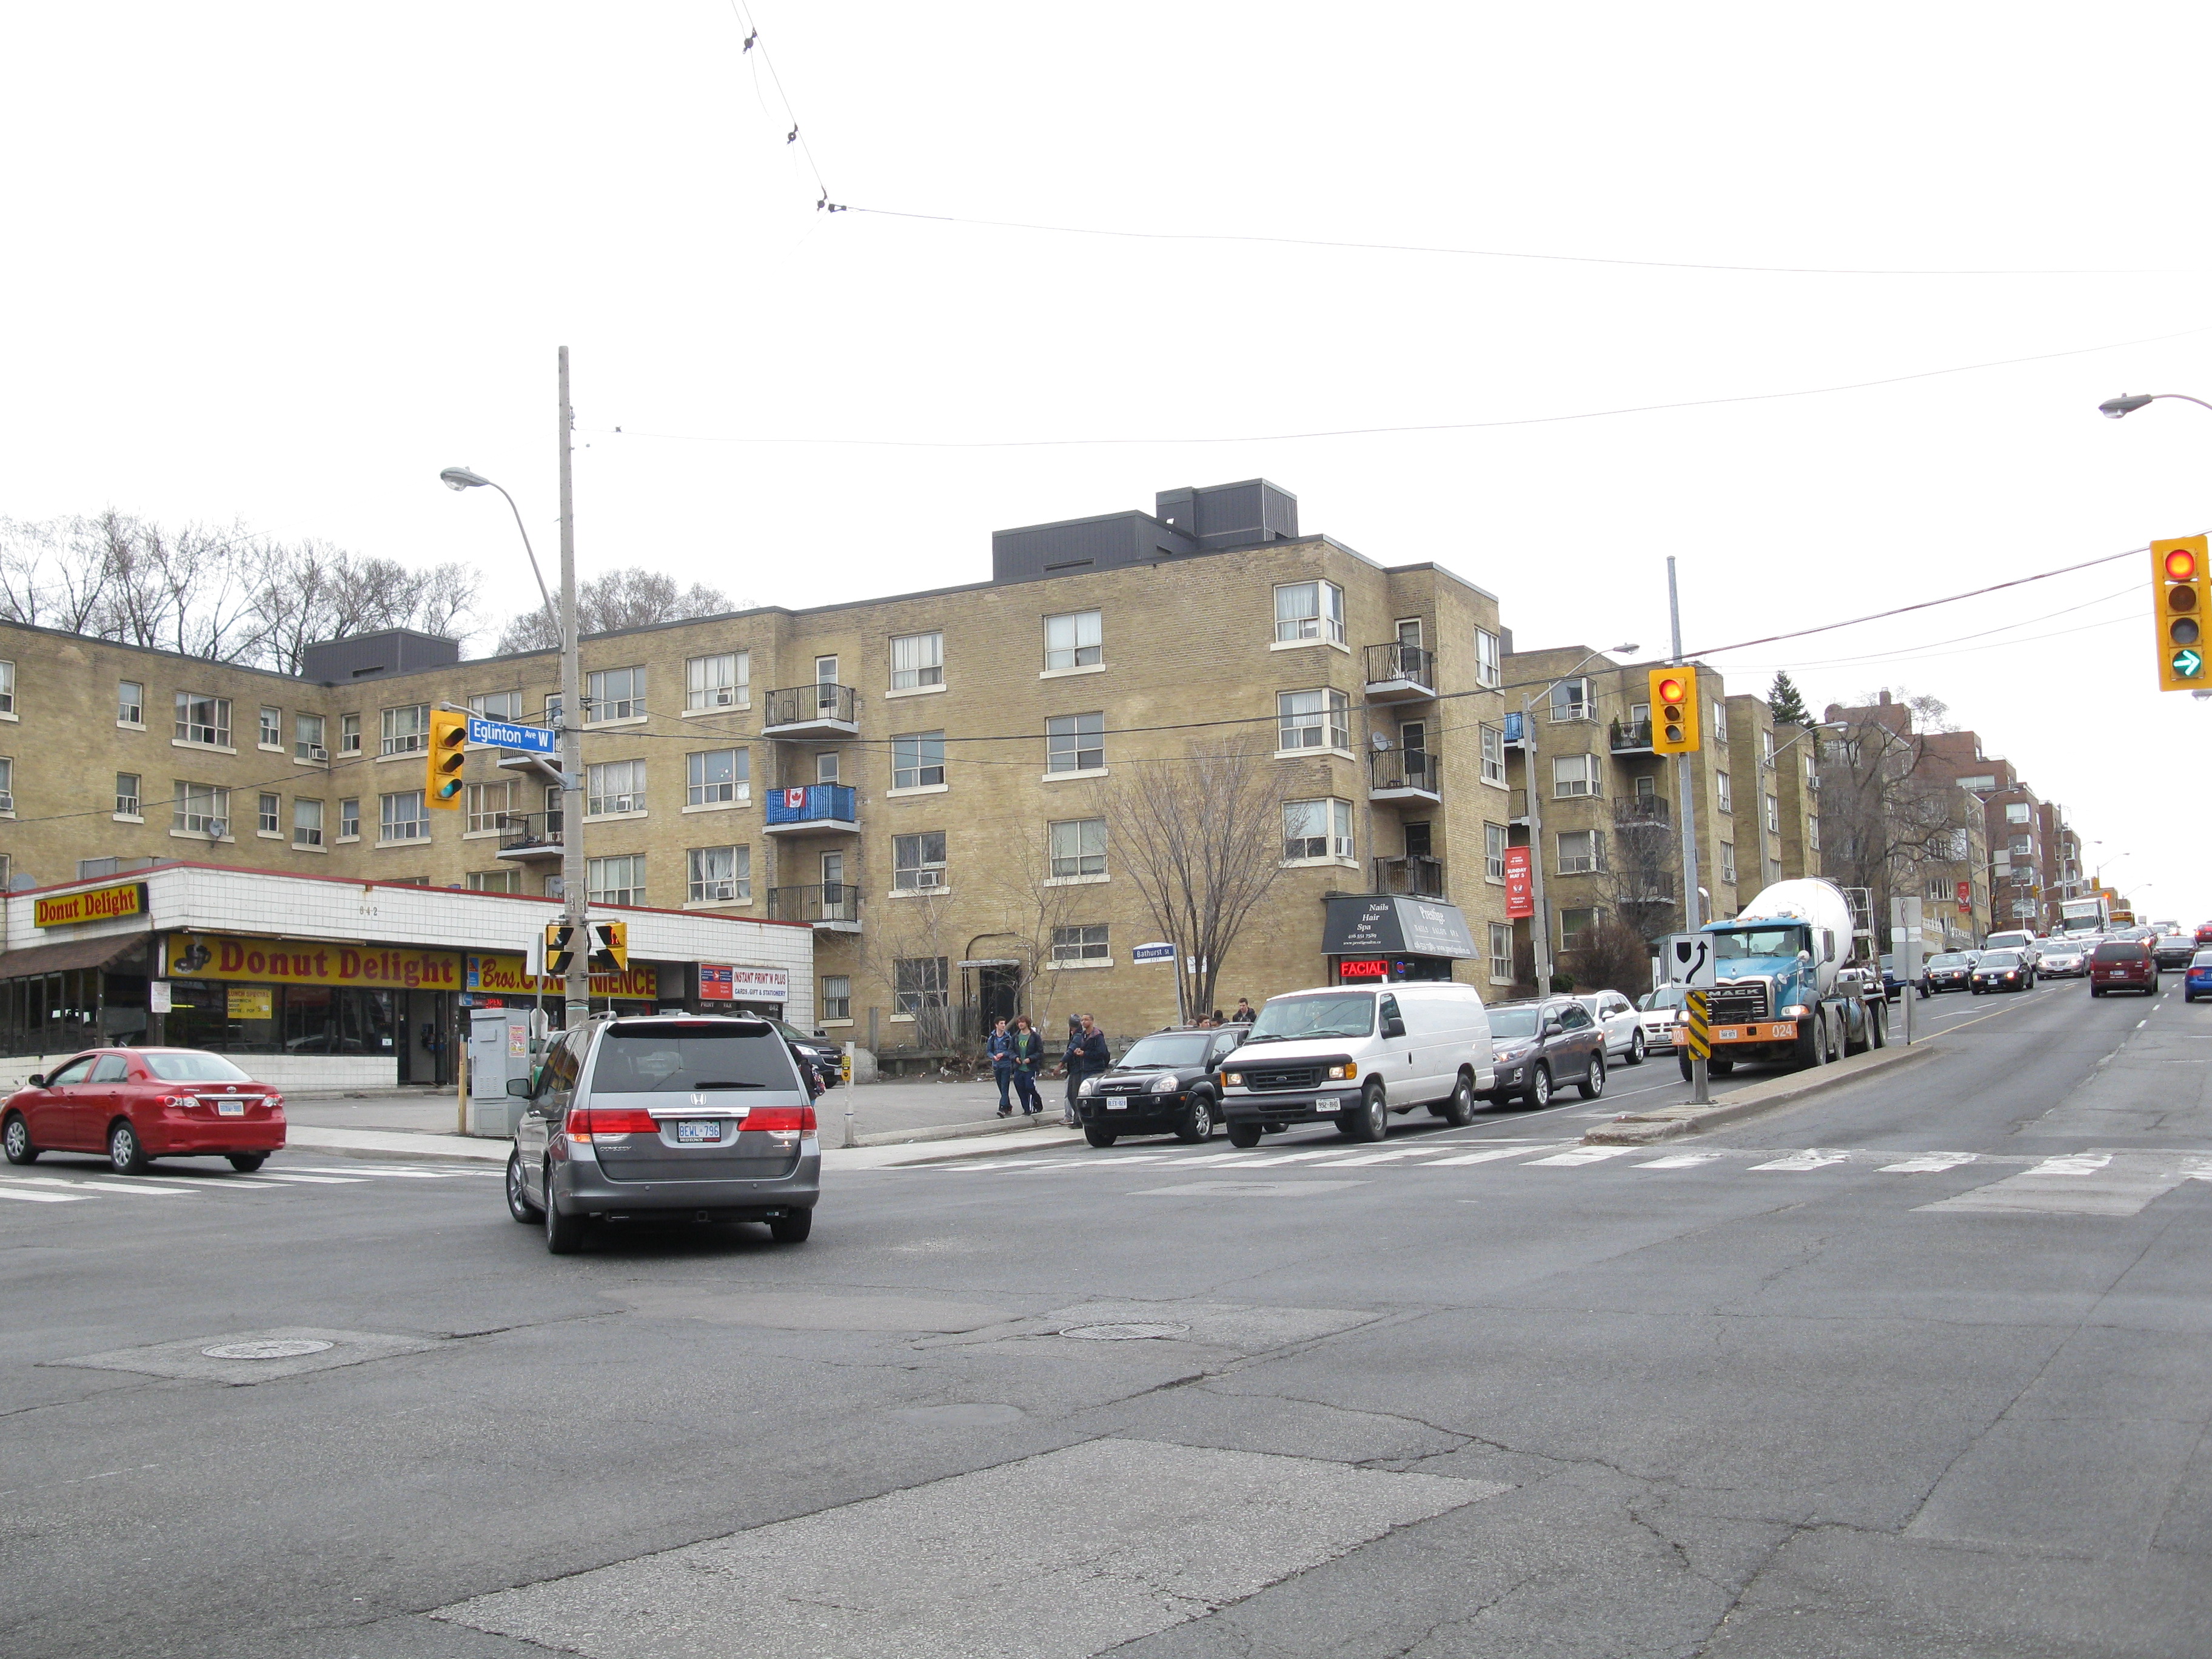 Intersection of bathurst and eglinton, 2013 04 09 -bs photo